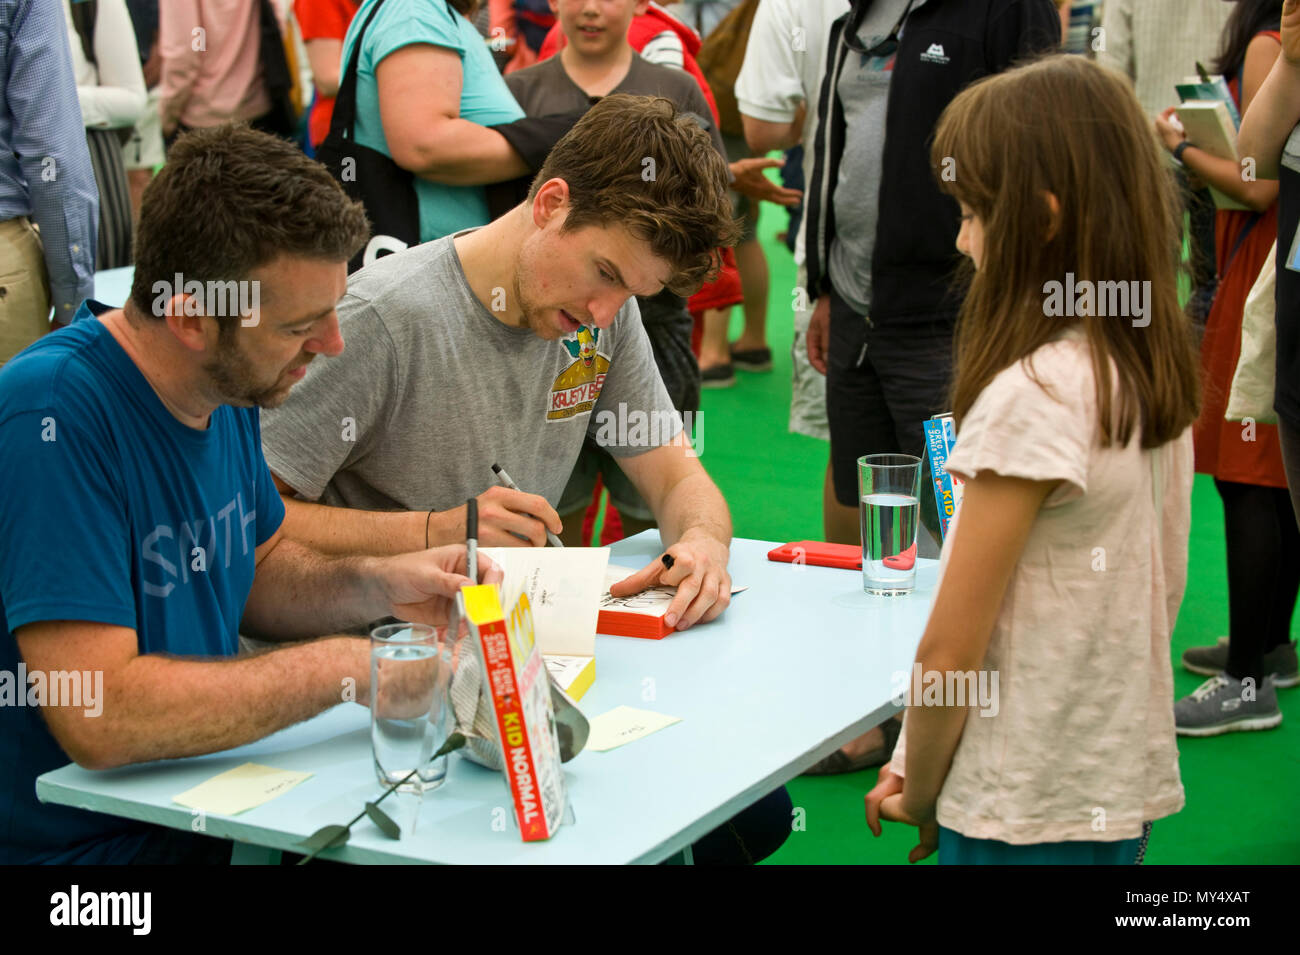 Greg James & Chris Smith book signing for fans in the bookshop at Hay Festival 2018 Hay-on-Wye Powys Wales UK Stock Photo